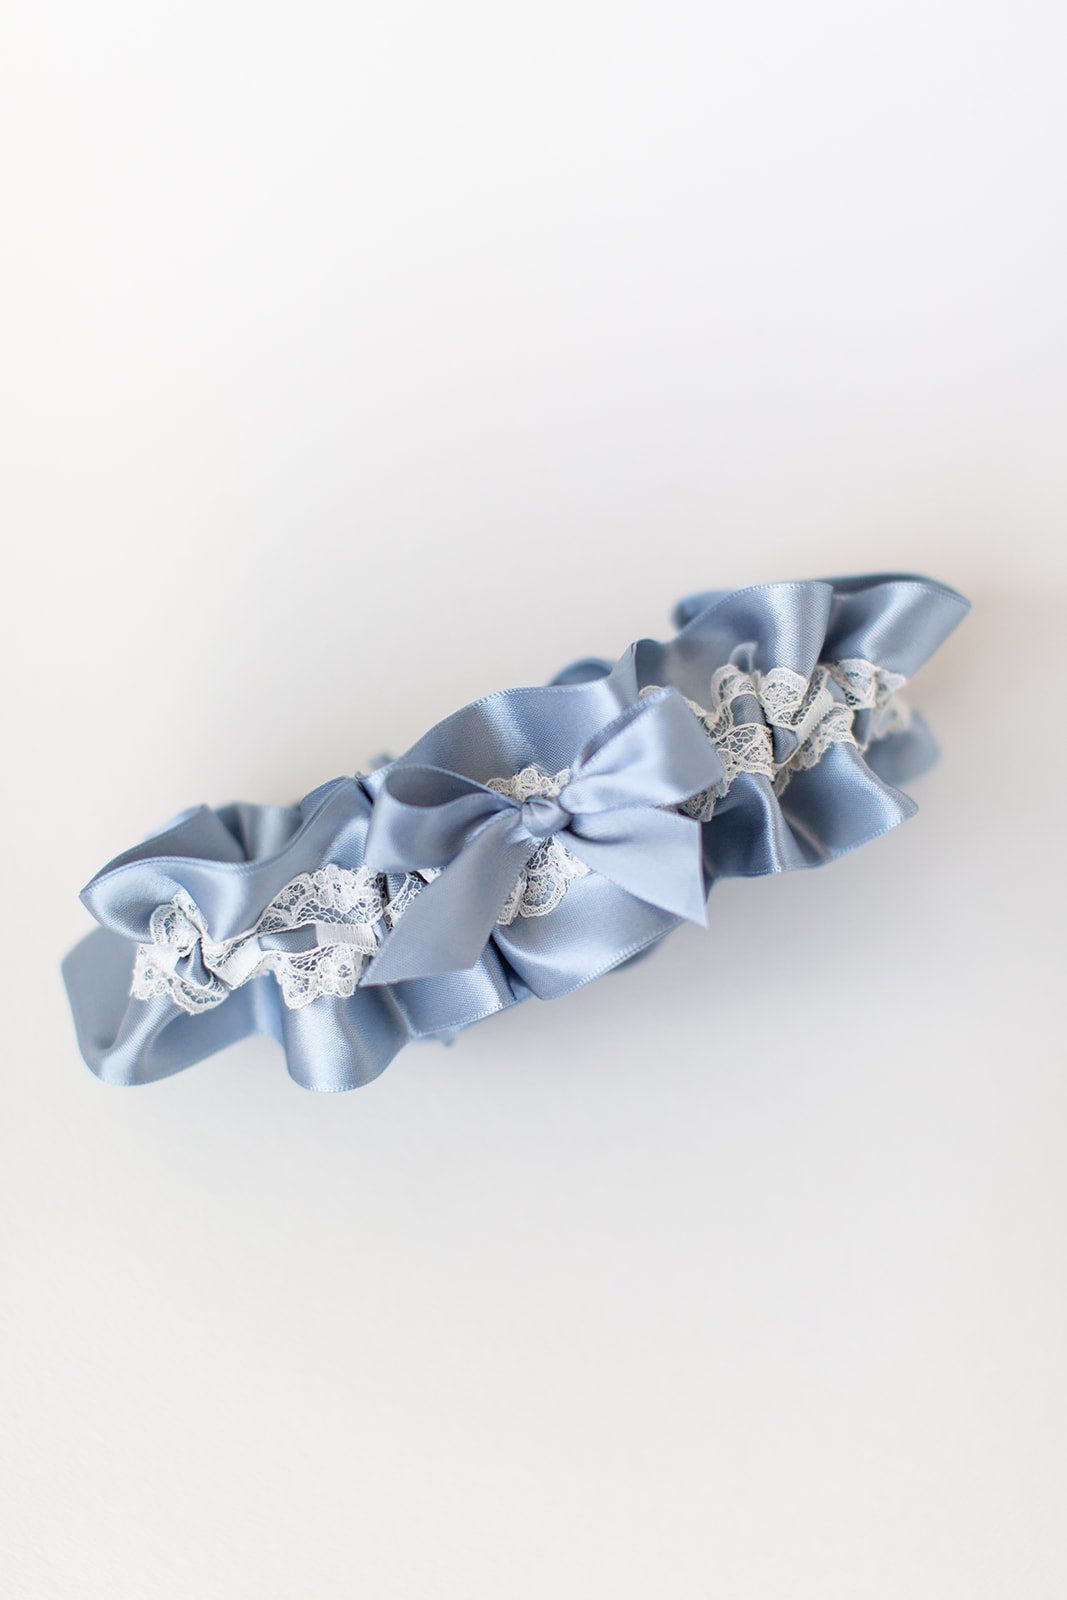 custom garter with dusty blue and ivory lace